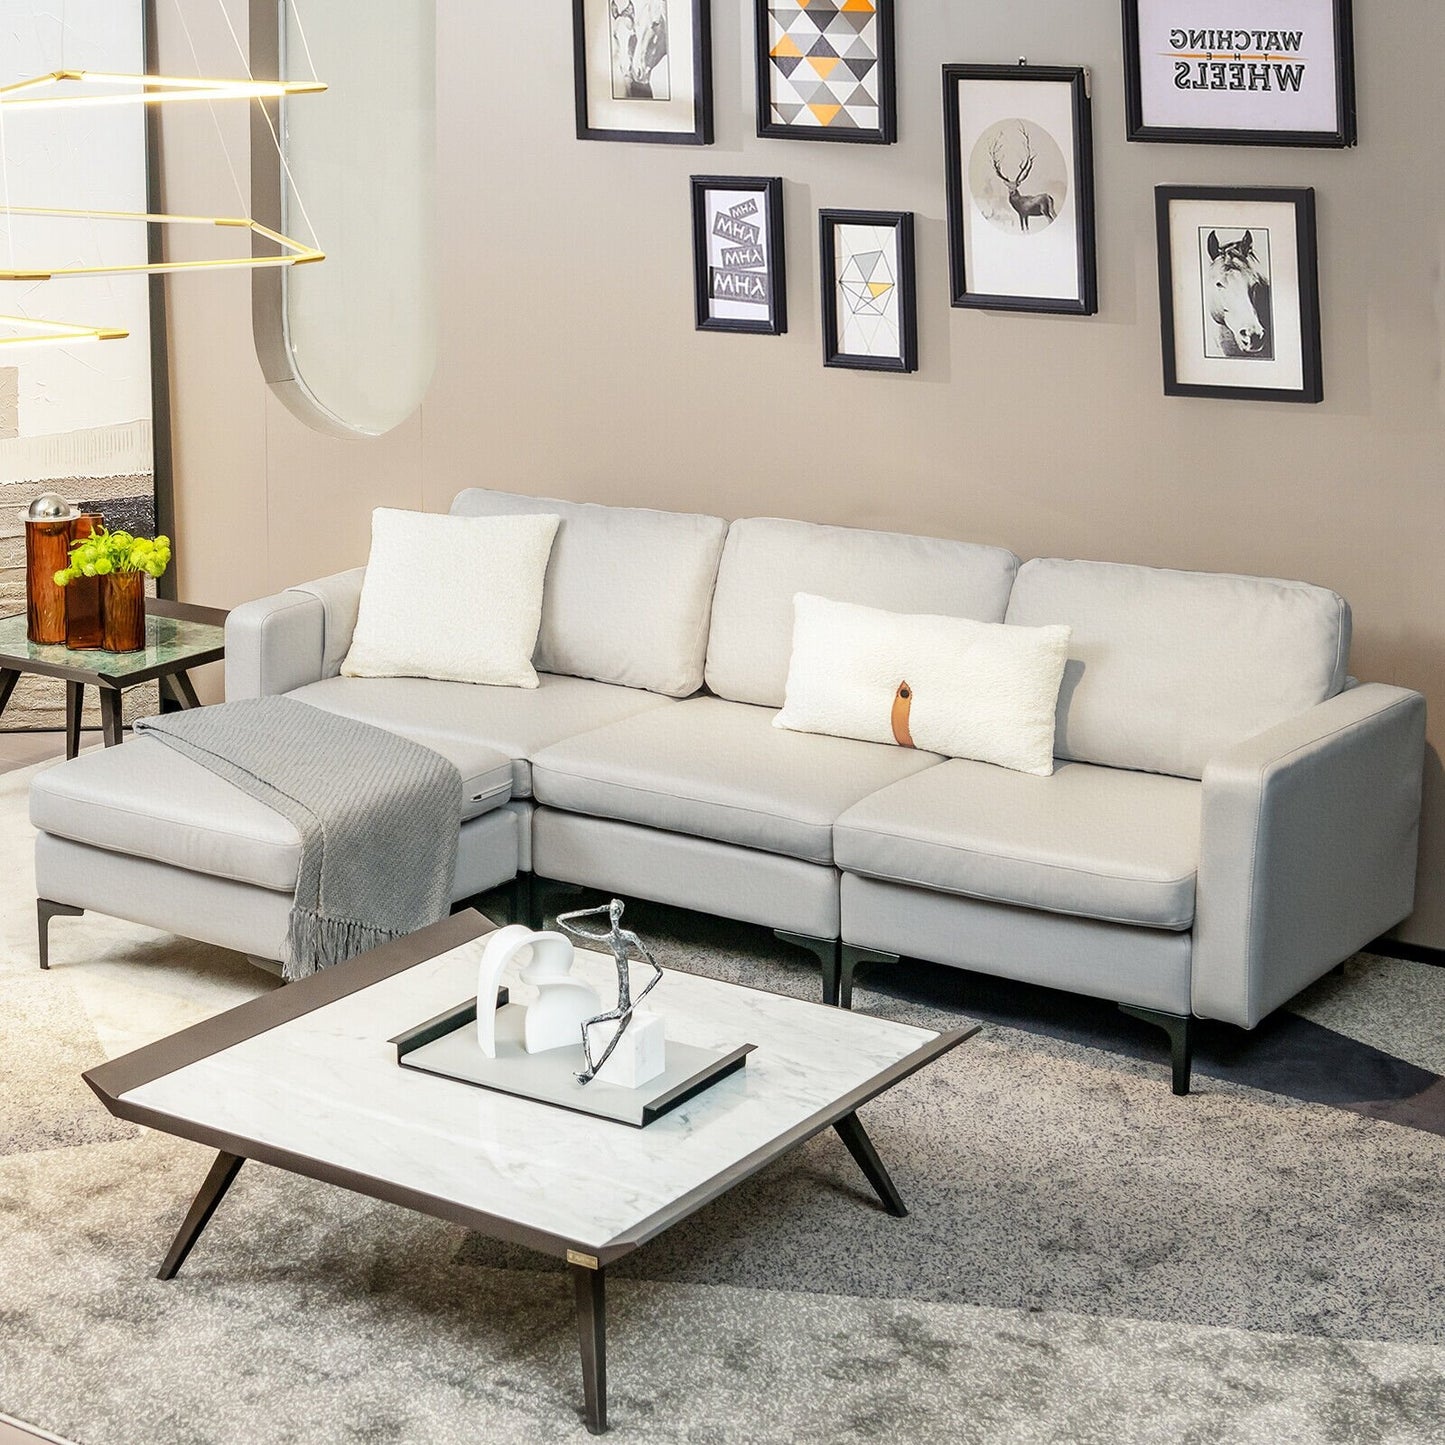 Modular L-shaped Sectional Sofa with Reversible Chaise and 2 USB Ports, Light Gray